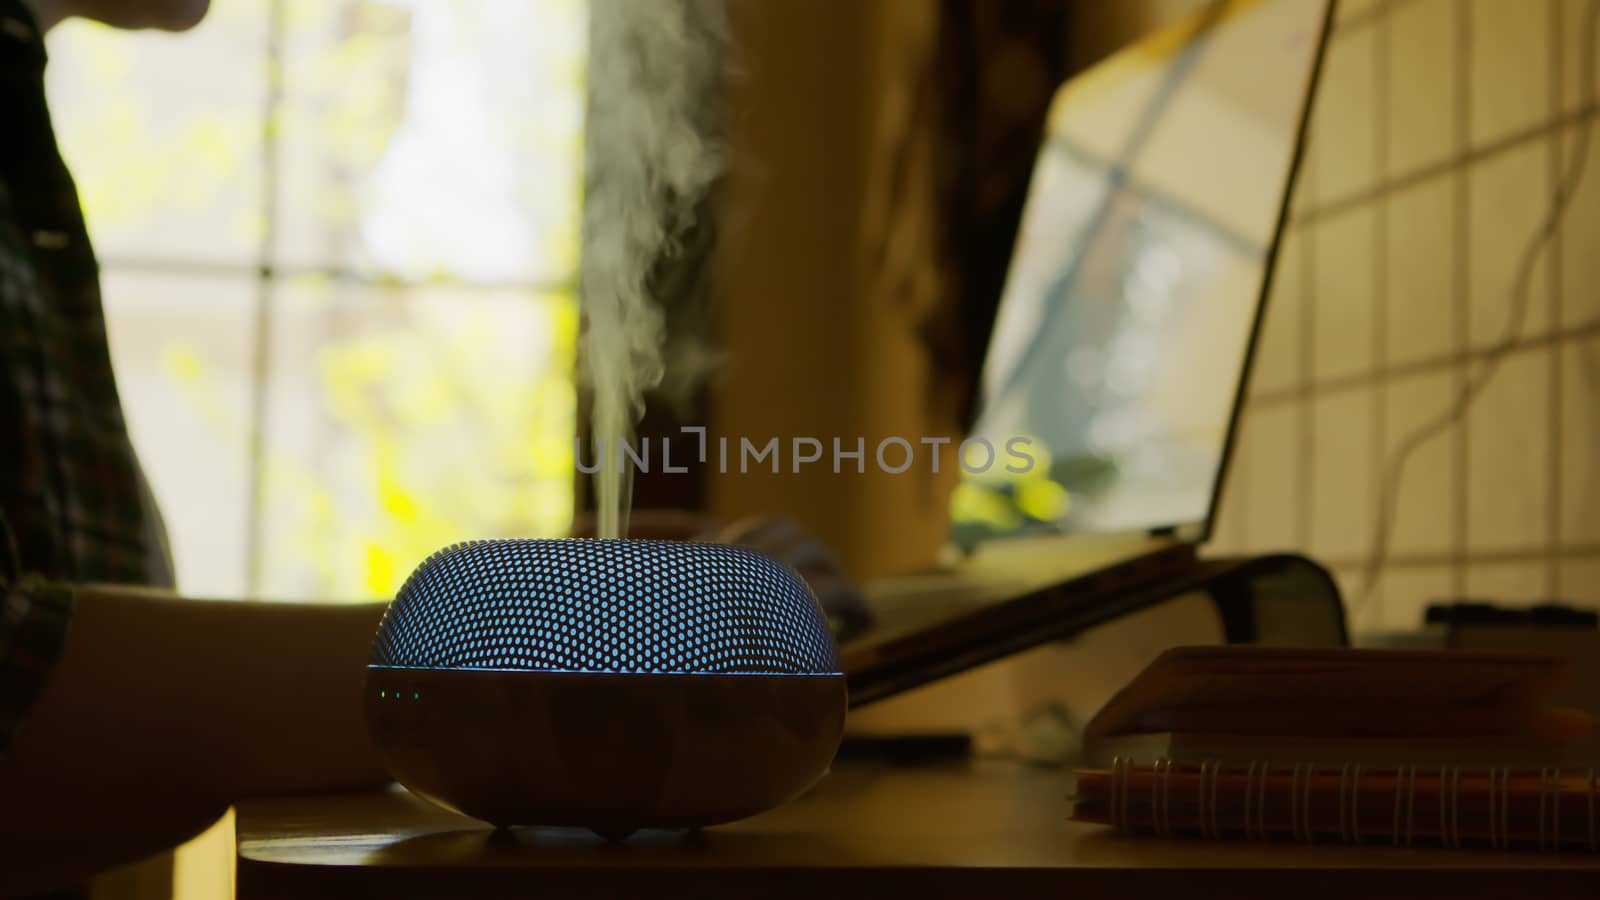 Vapor coming from blue led esential oil diffuser with aromatic perfume while freelance woman is working on laptop.